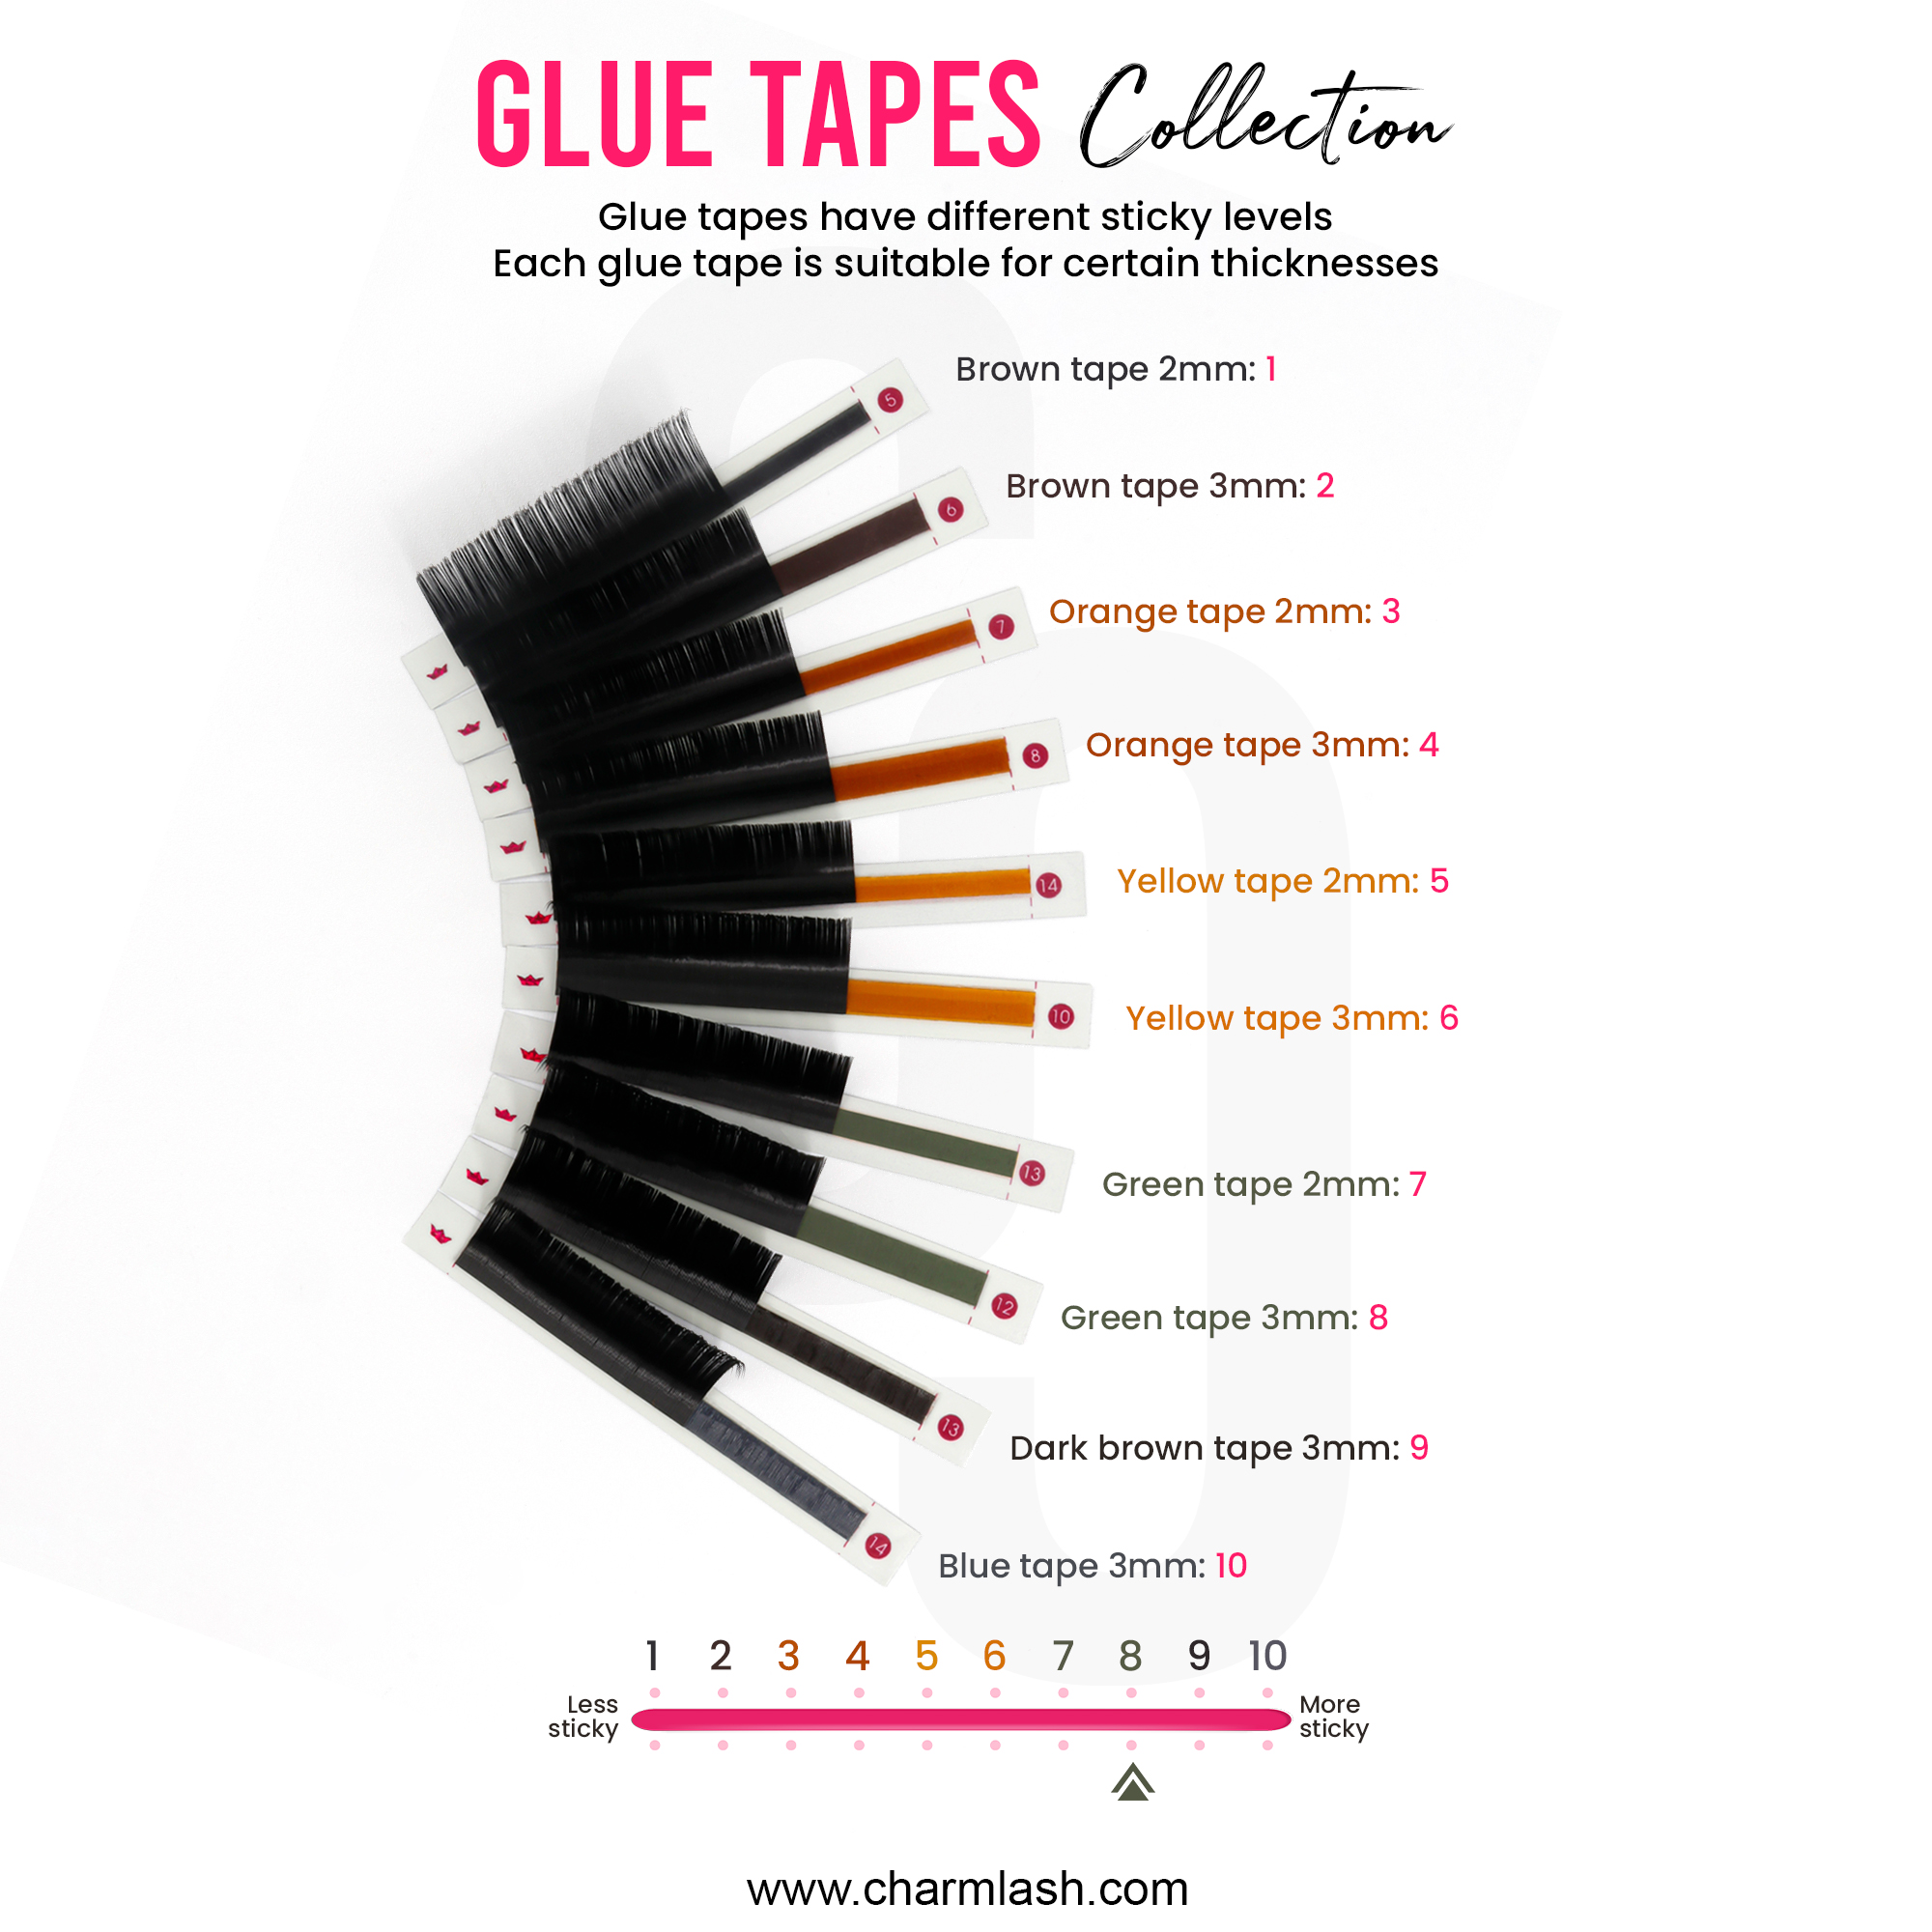 Glue-tapes-collection-CharmLash